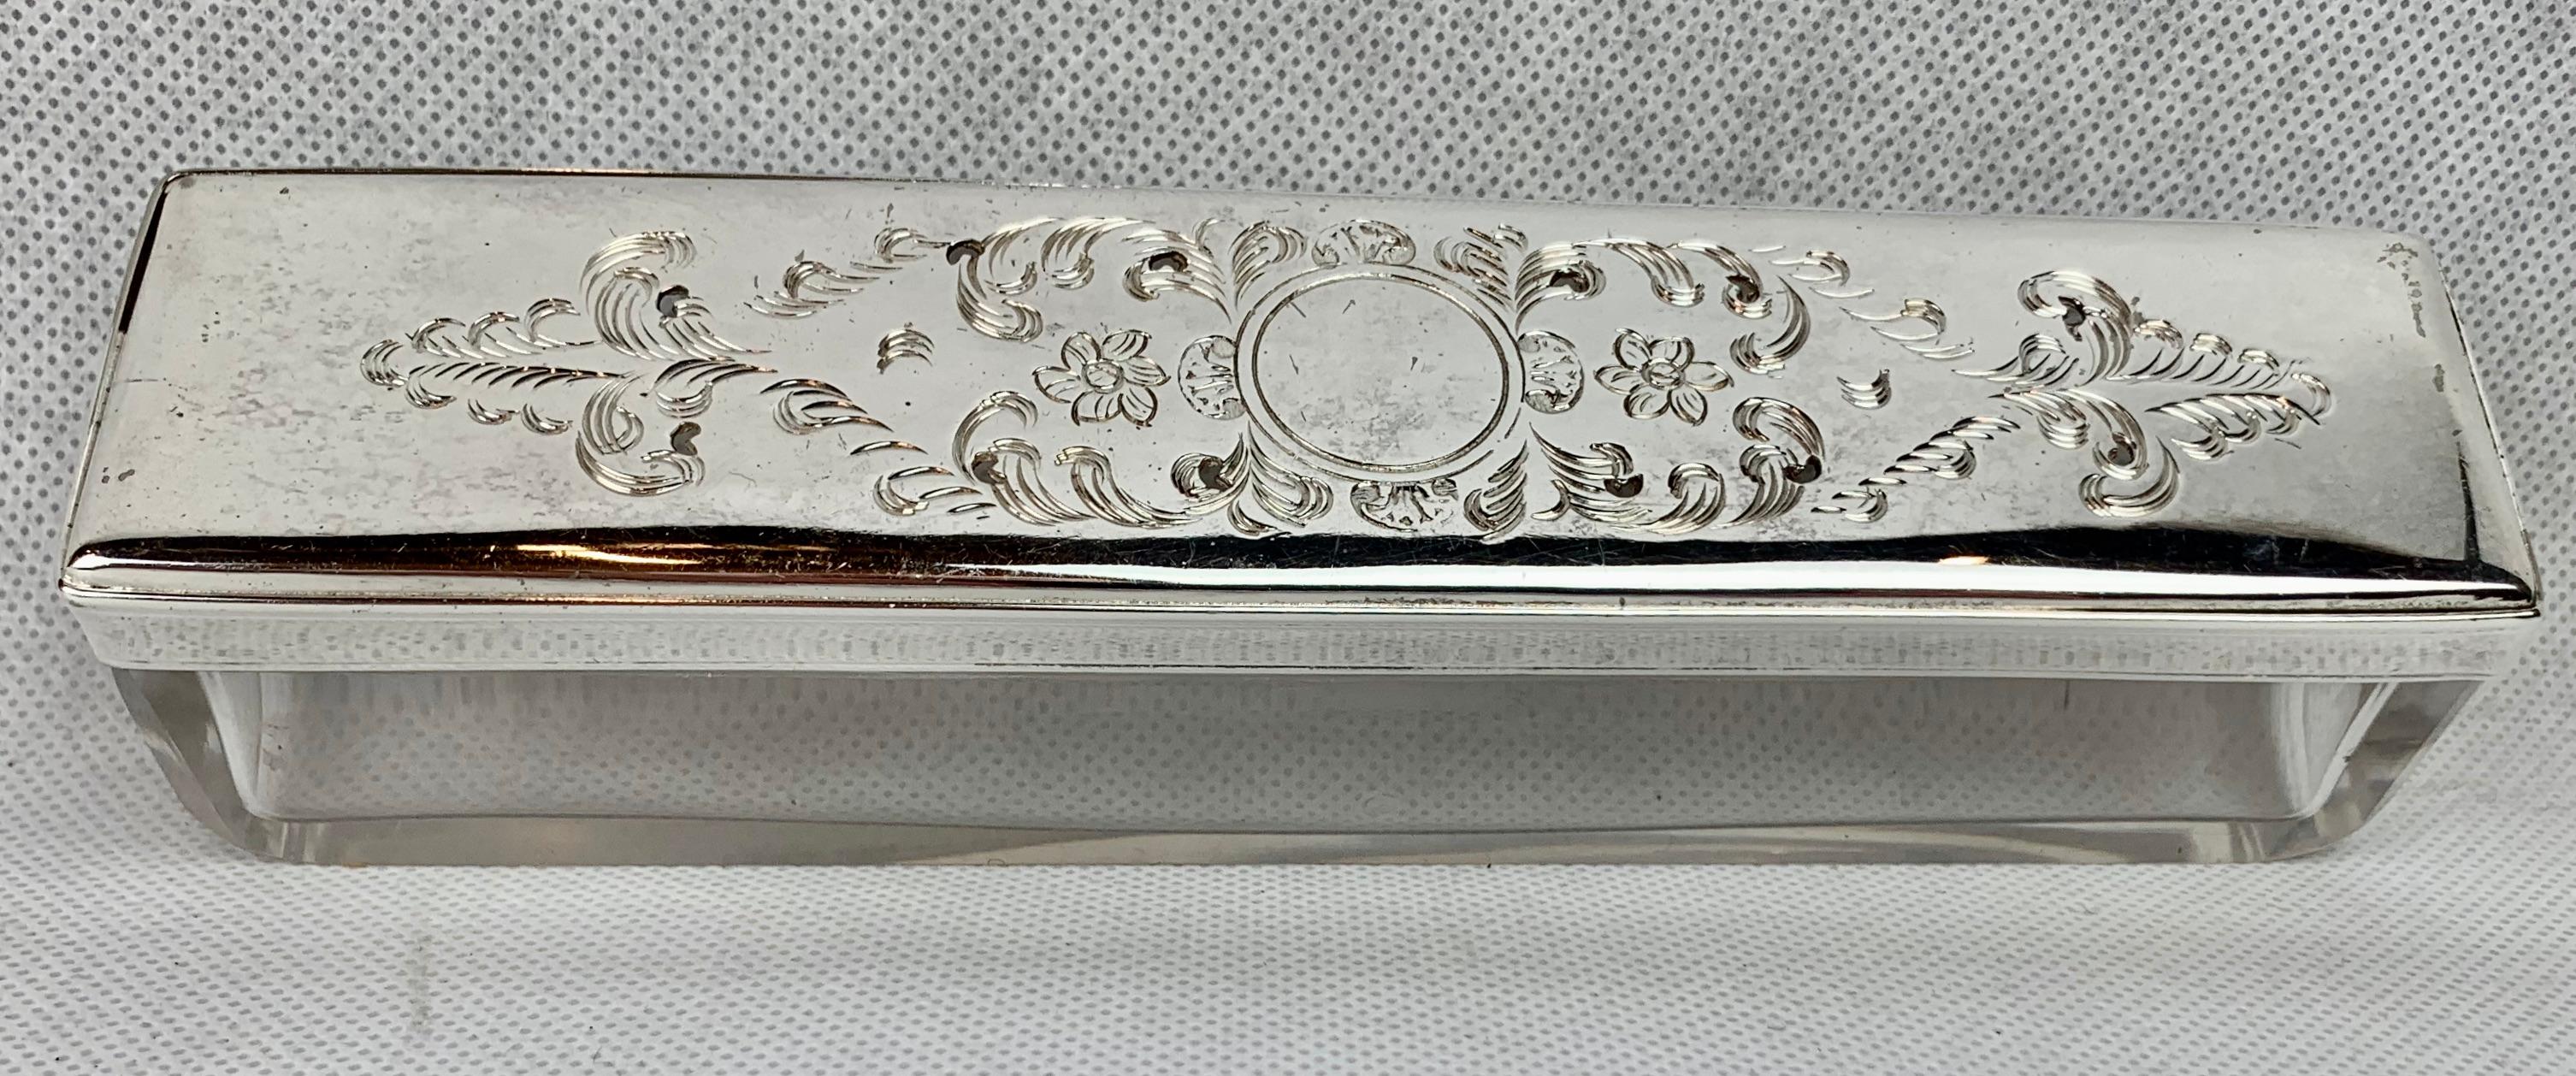 Silver Plate Silver Lidded Engraved Victorian Glass Vanity Box 